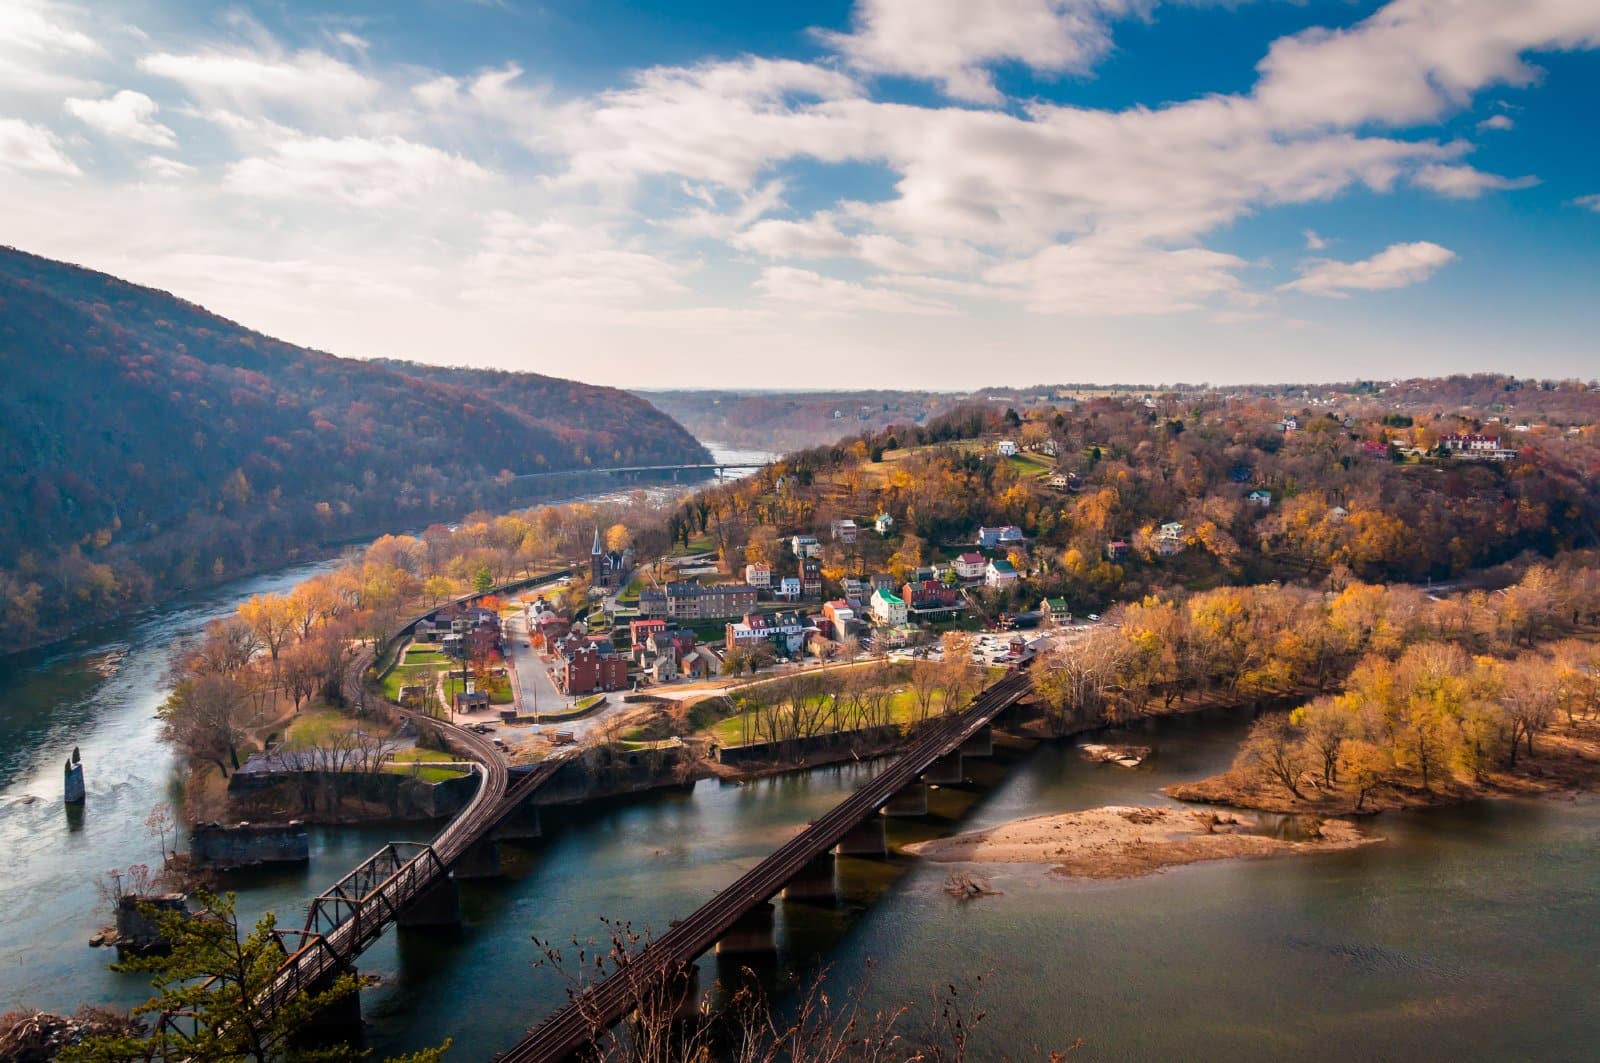 <p class="wp-caption-text">Image Credit: Shutterstock / Nejdet Duzen</p>  <p>At the confluence of the Potomac and Shenandoah rivers, Harpers Ferry is a quaint town steeped in Civil War history, offering scenic beauty and trails that tell tales of yore. It’s a hiker’s paradise with a side of history lesson.</p>